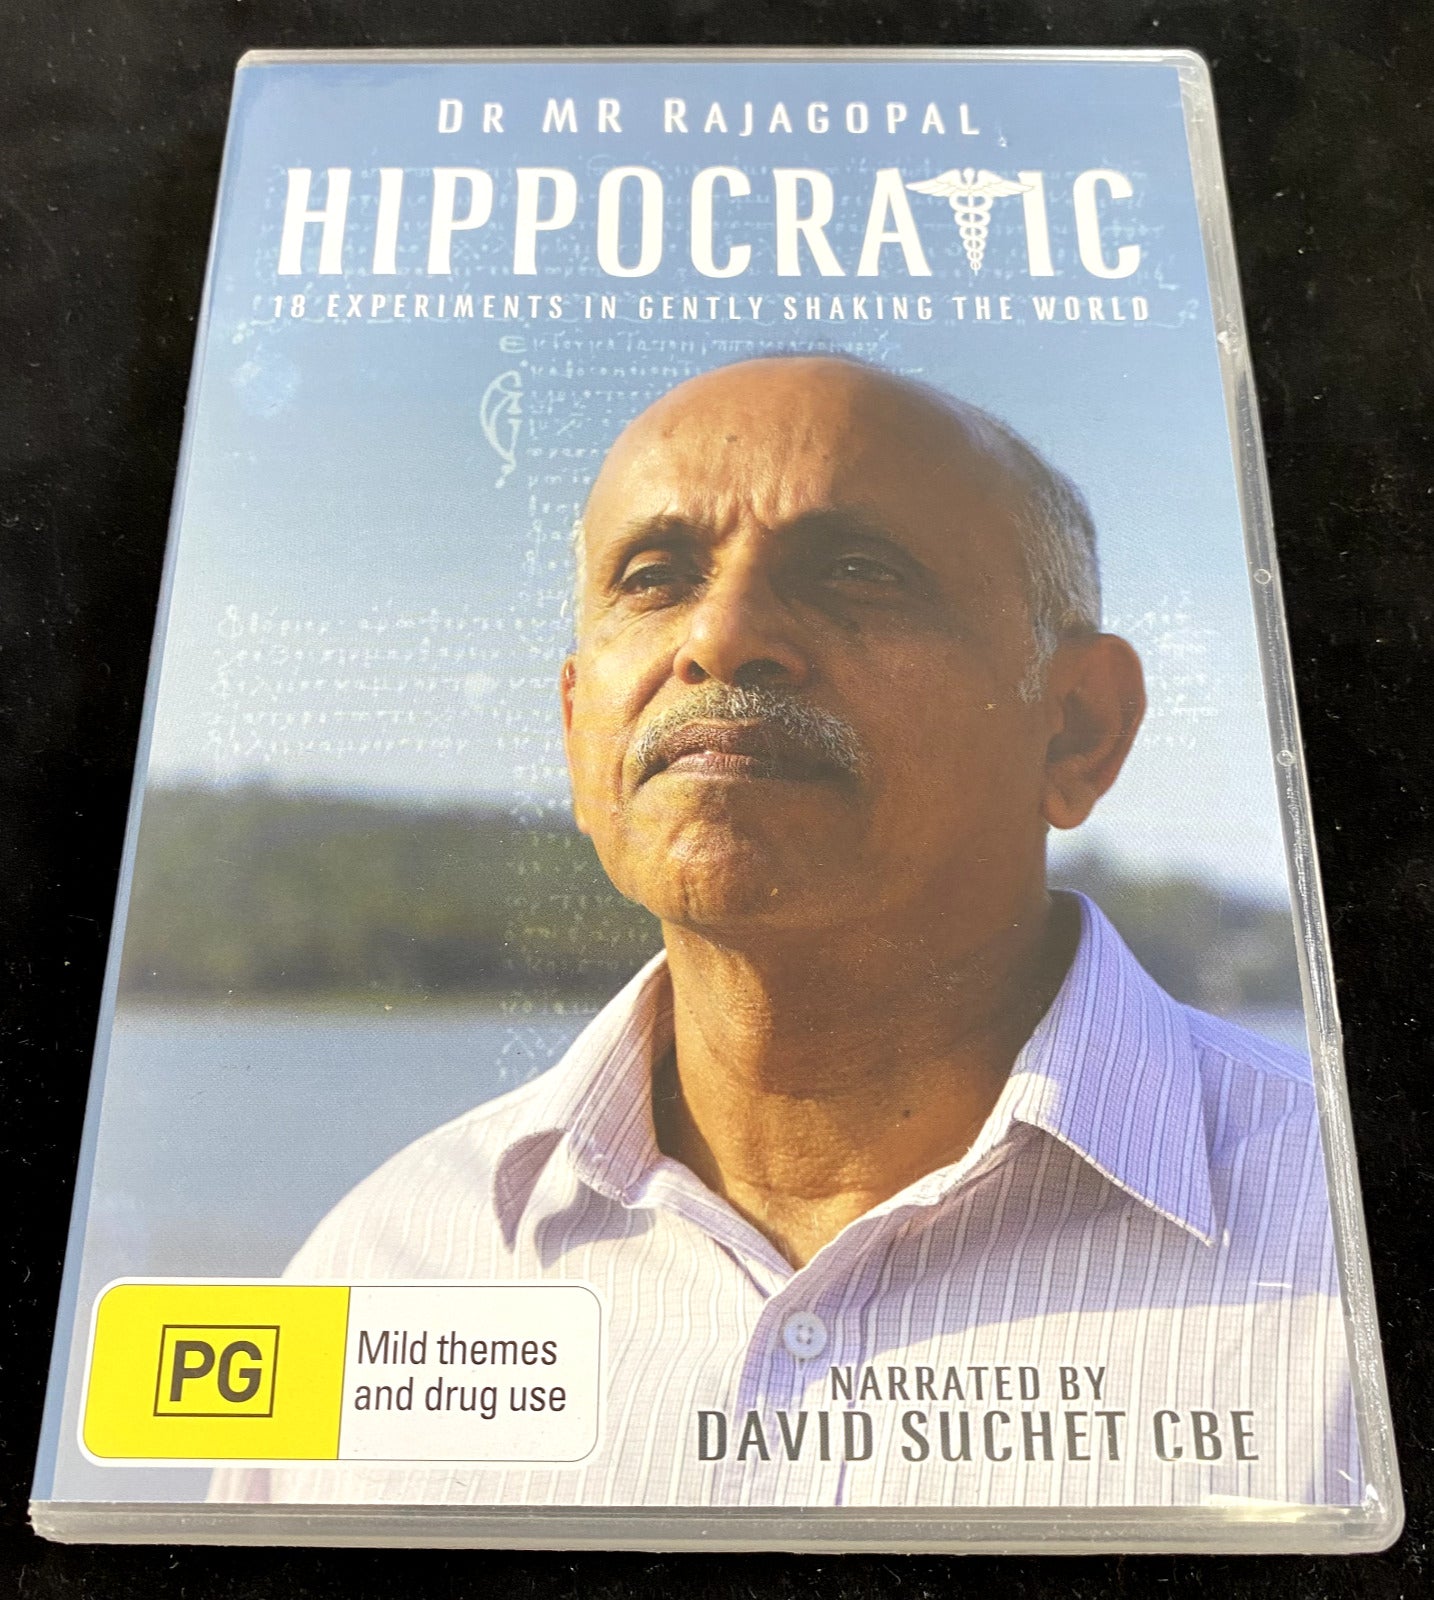 HIPPOCRATIC: 18 Experiments in Gently Shaking the World, DVD, Dr MR Rajagopal